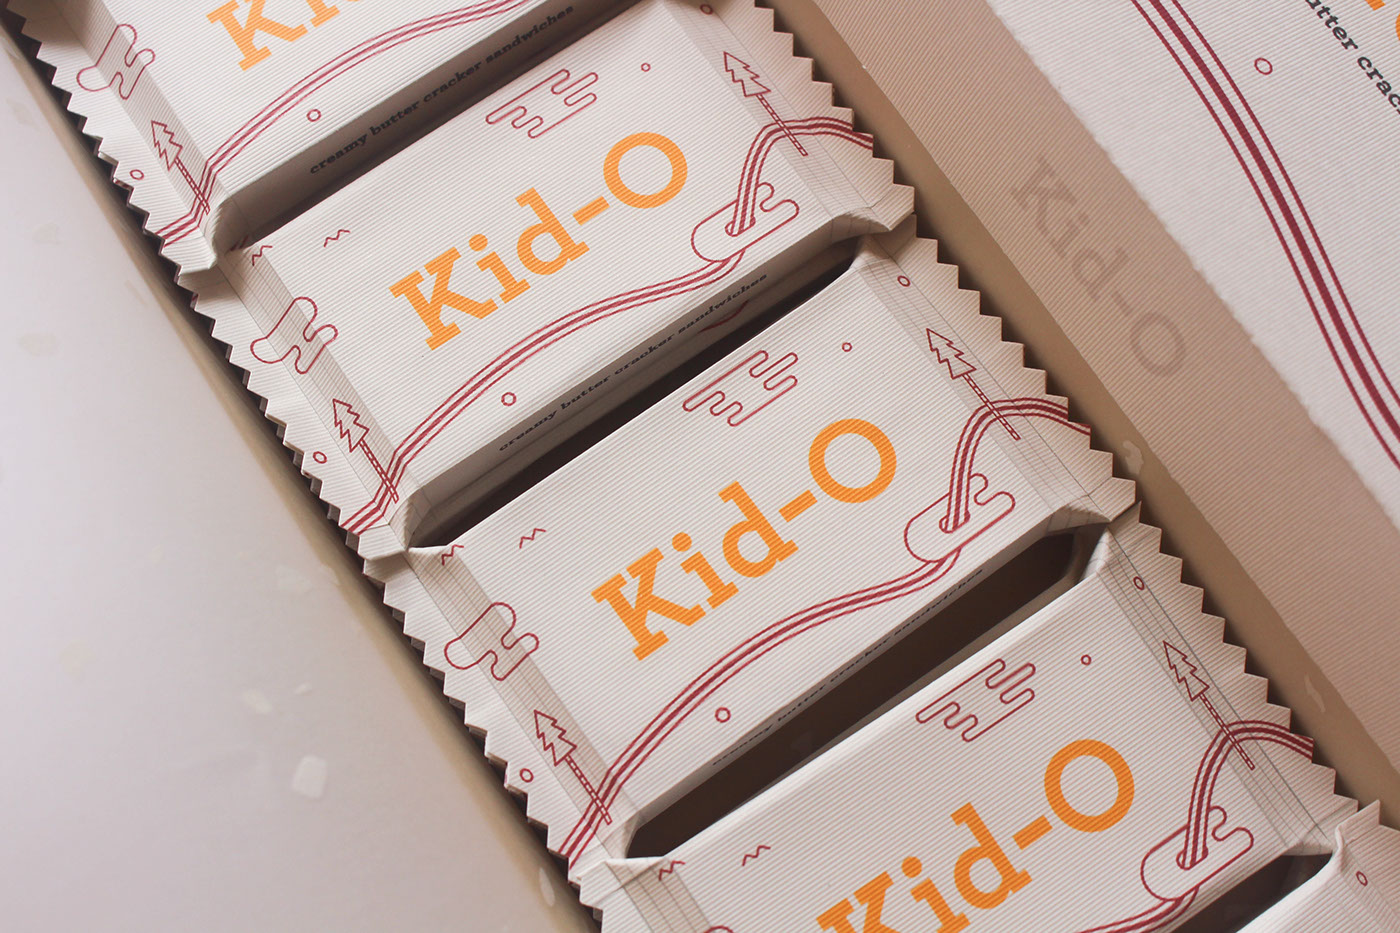 Kid-O nissin repackage redesign identity sandwich crackers Food Packaging children gift box Supermarket Food  biscuits asian snacks